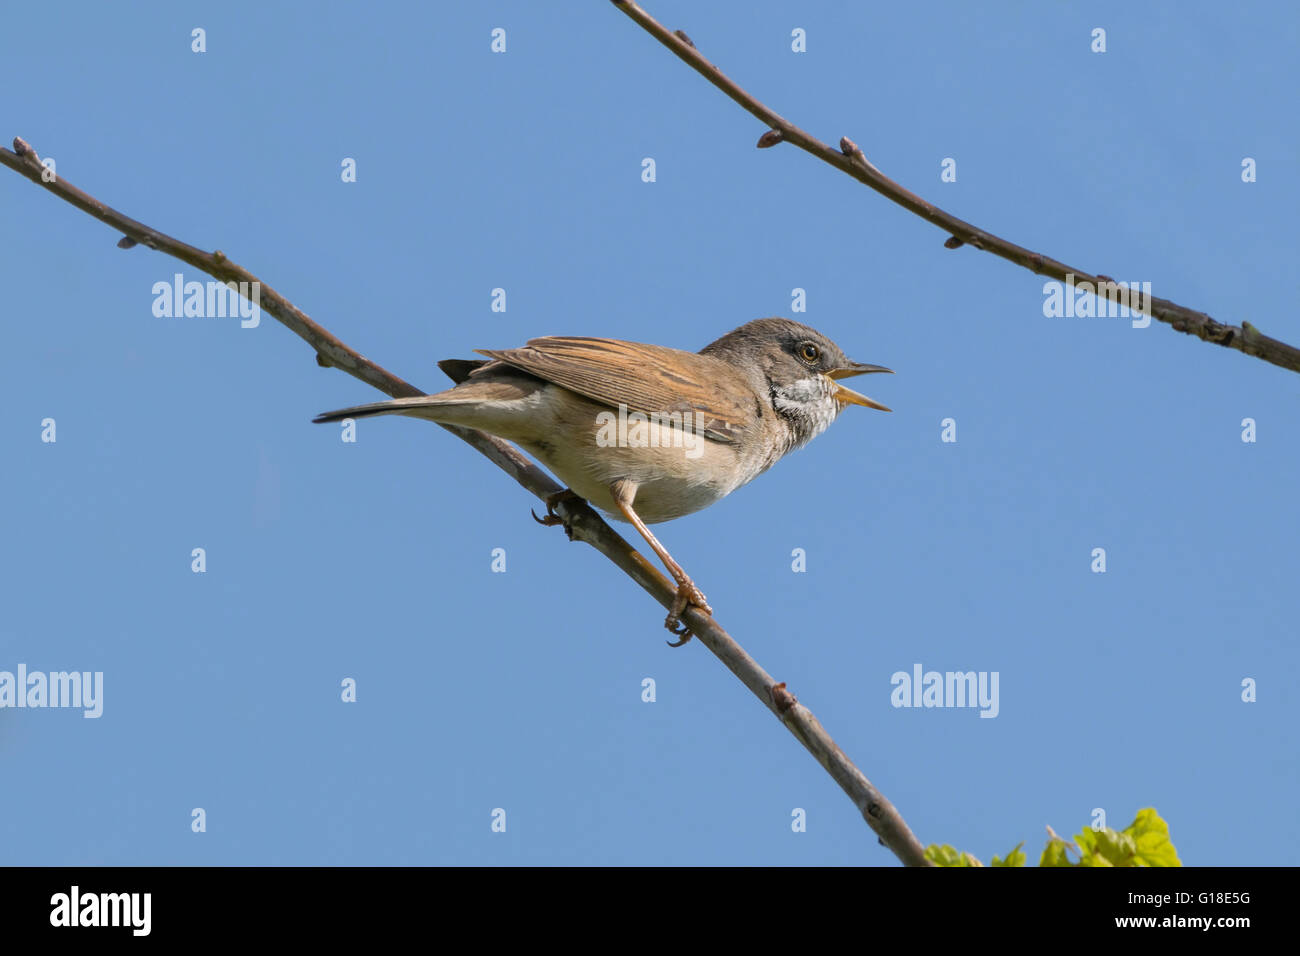 Whitethroat bird chirping away whilst perched on a branch Stock Photo